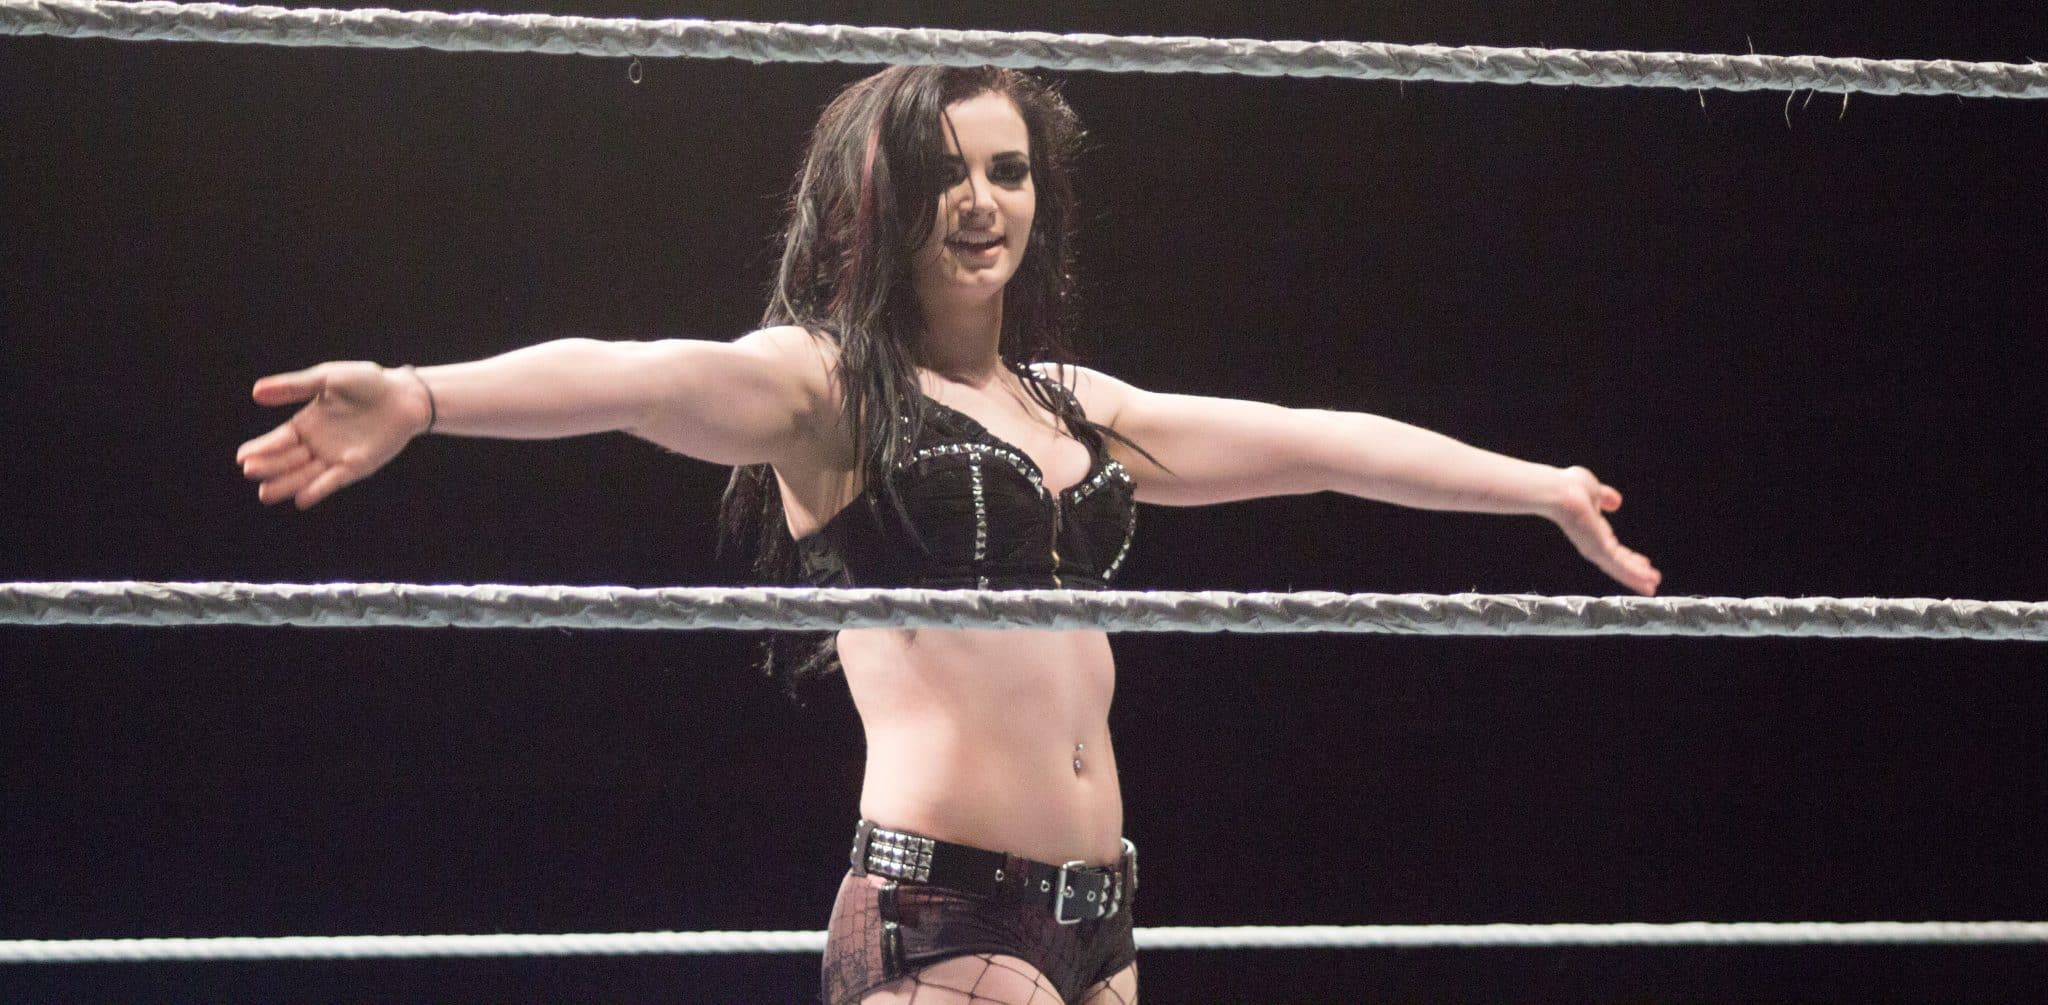 Paige at WWE event